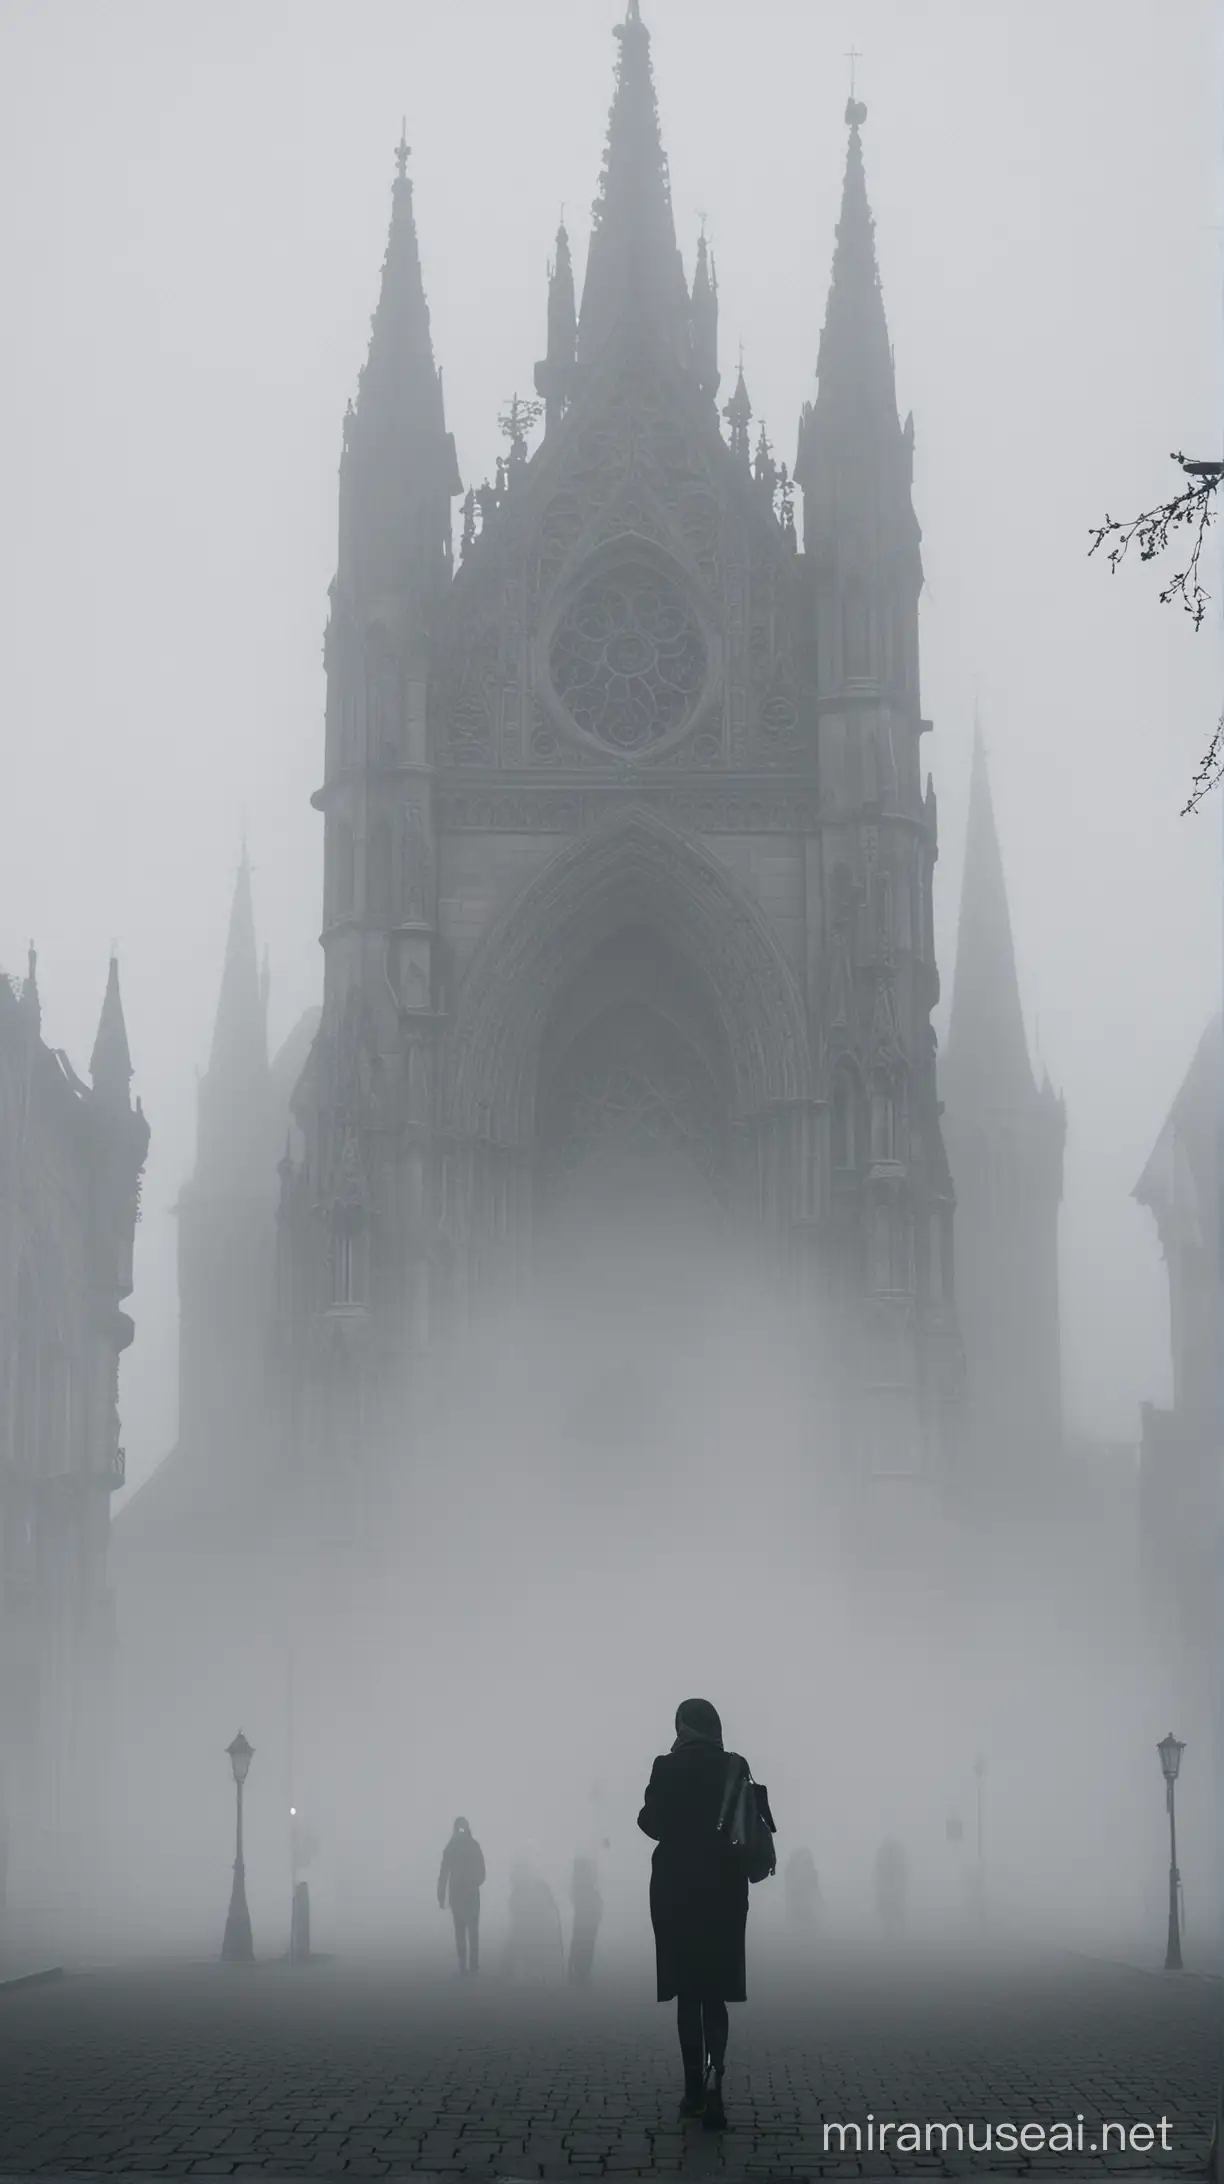 Mysterious Figure Walking in Fog near Gothic Architecture